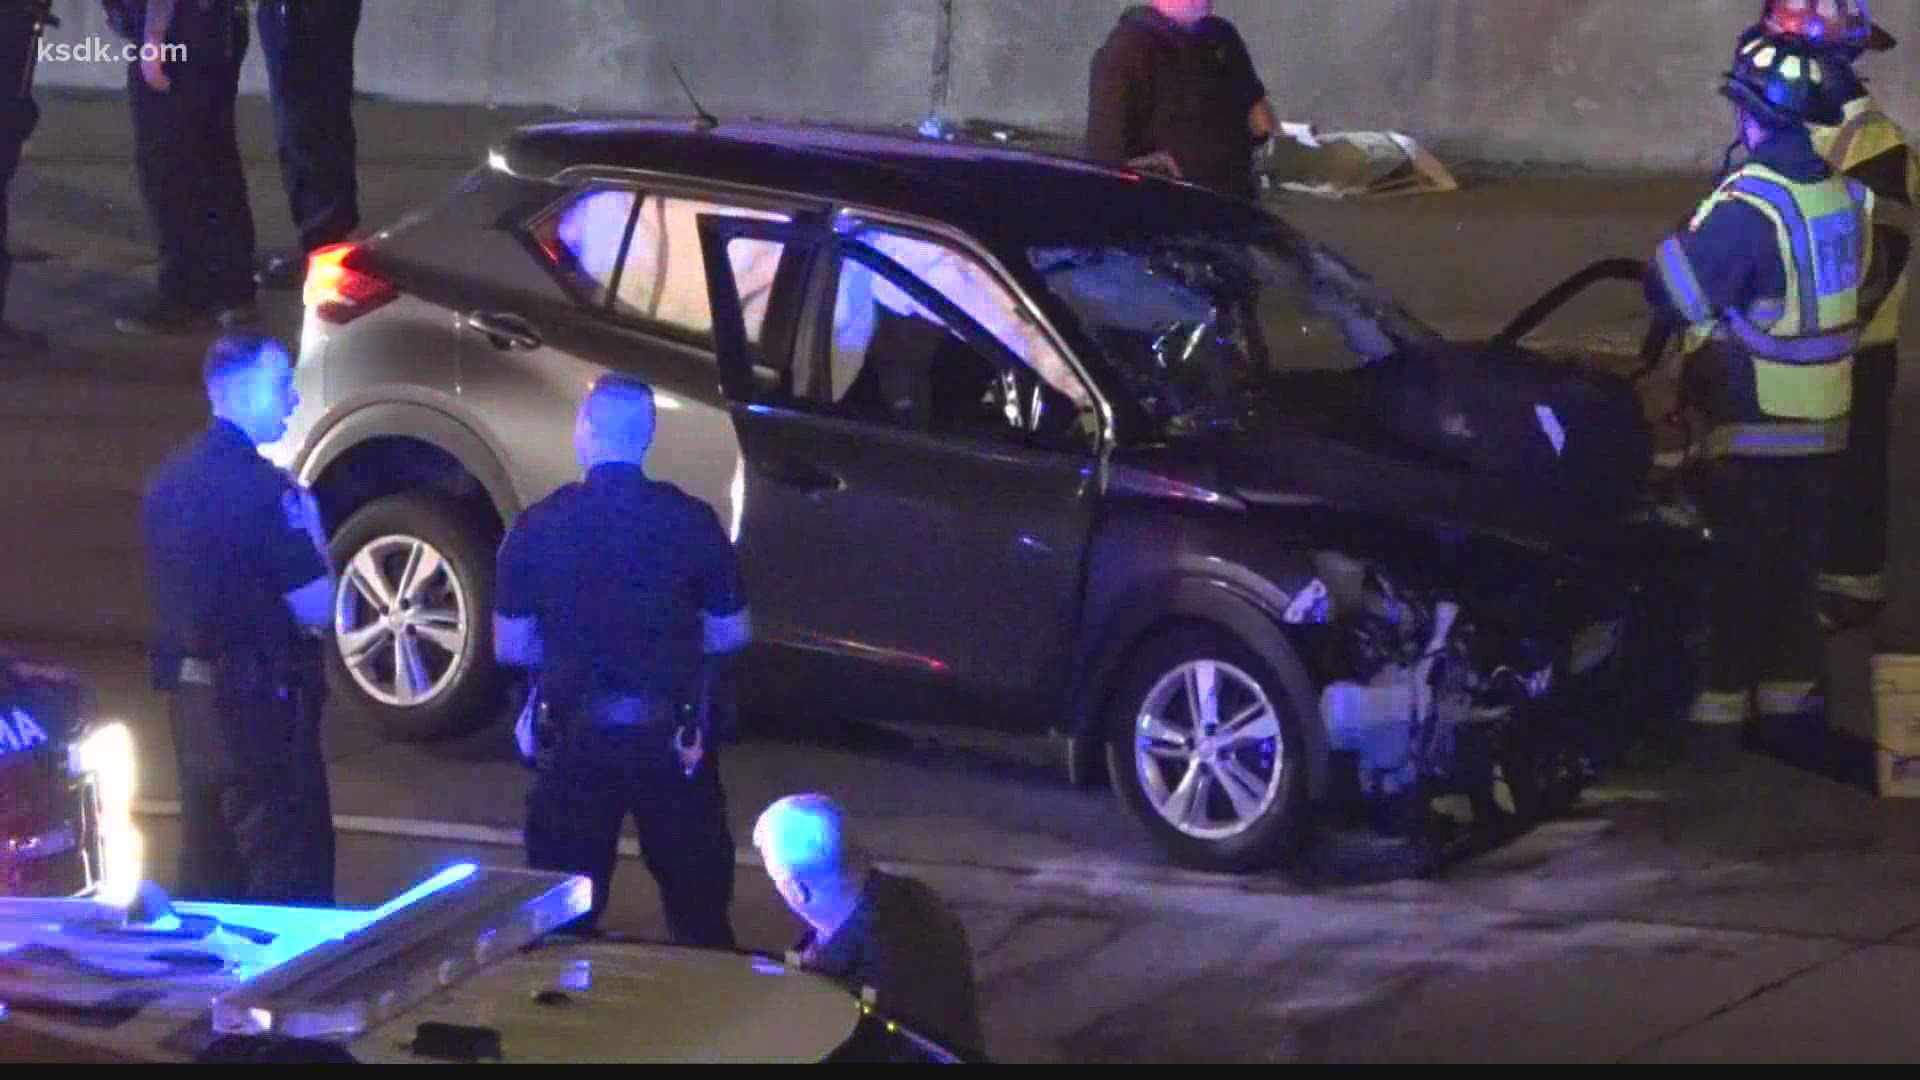 The crash happened in the westbound lanes of I-70 just before 12:30 a.m. Friday.